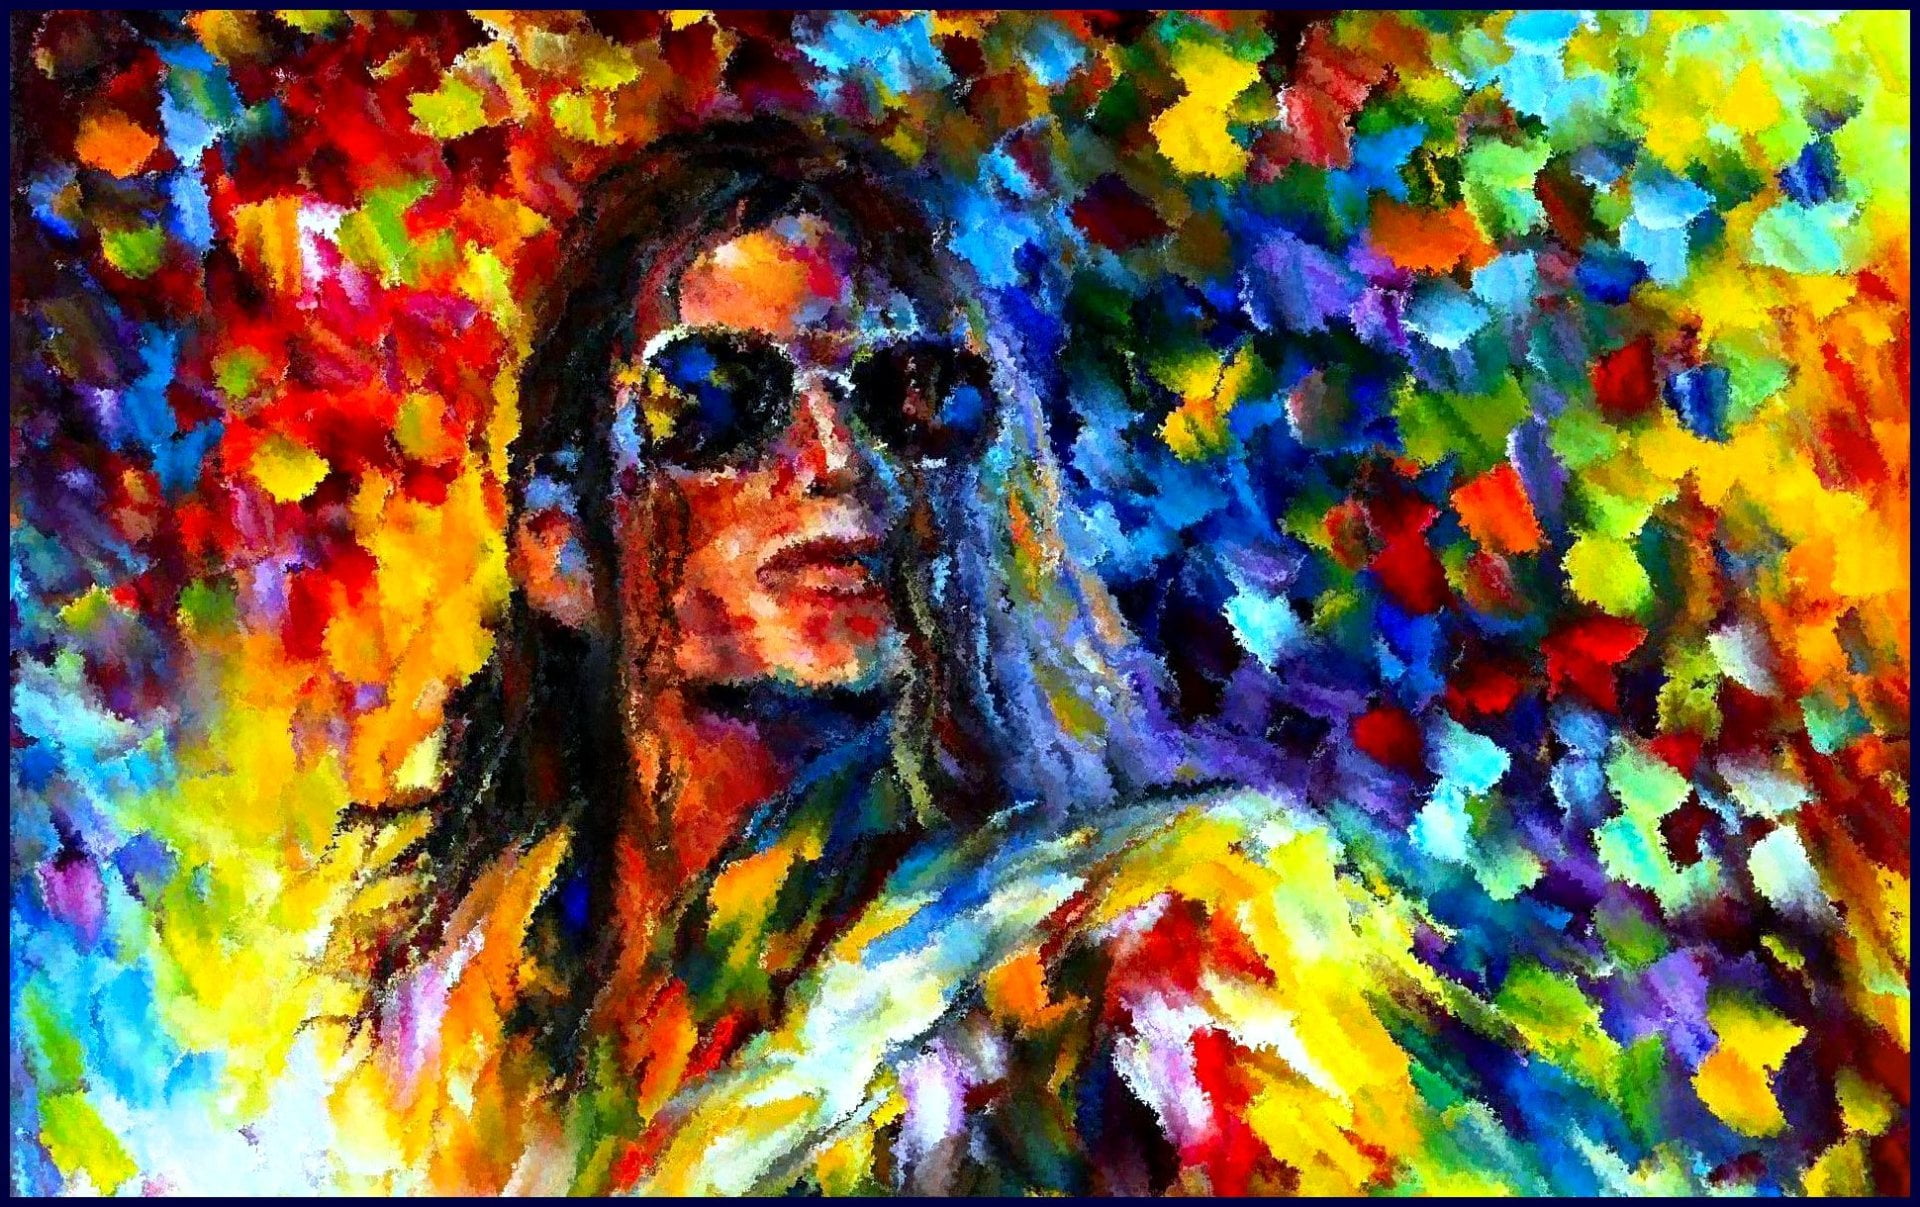 multicolored Michael Jackson painting, Singers, Artistic, Colorful